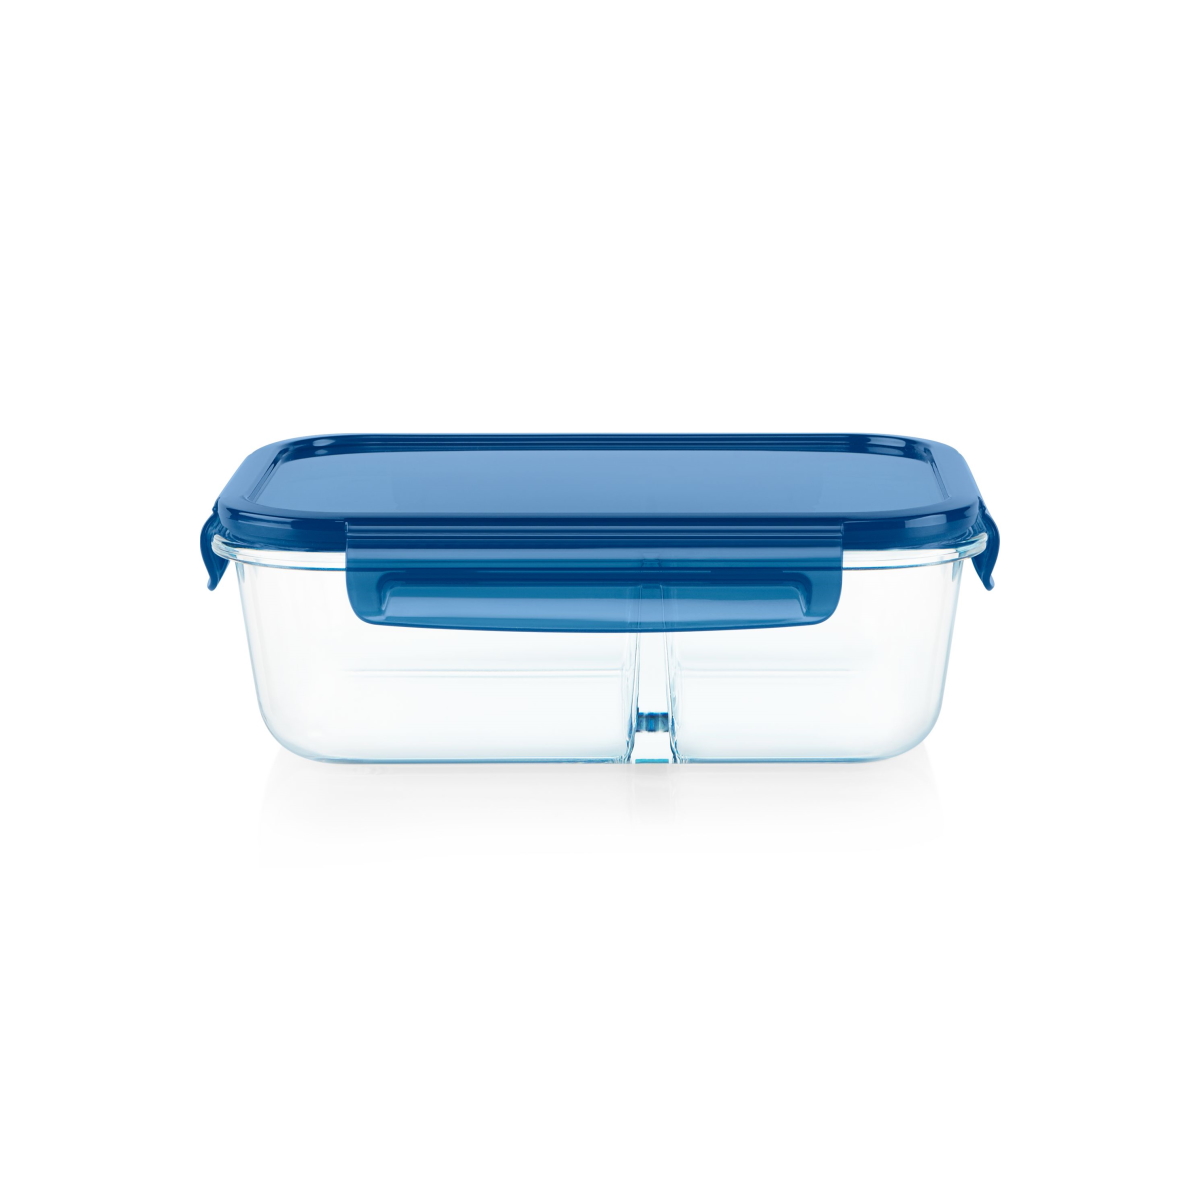 https://www.berings.com/wp-content/uploads/2023/03/Pyrex-MealBox-5.8-cup-Divided-Glass-Food-Storage-Container-with-Blue-Lid.jpg